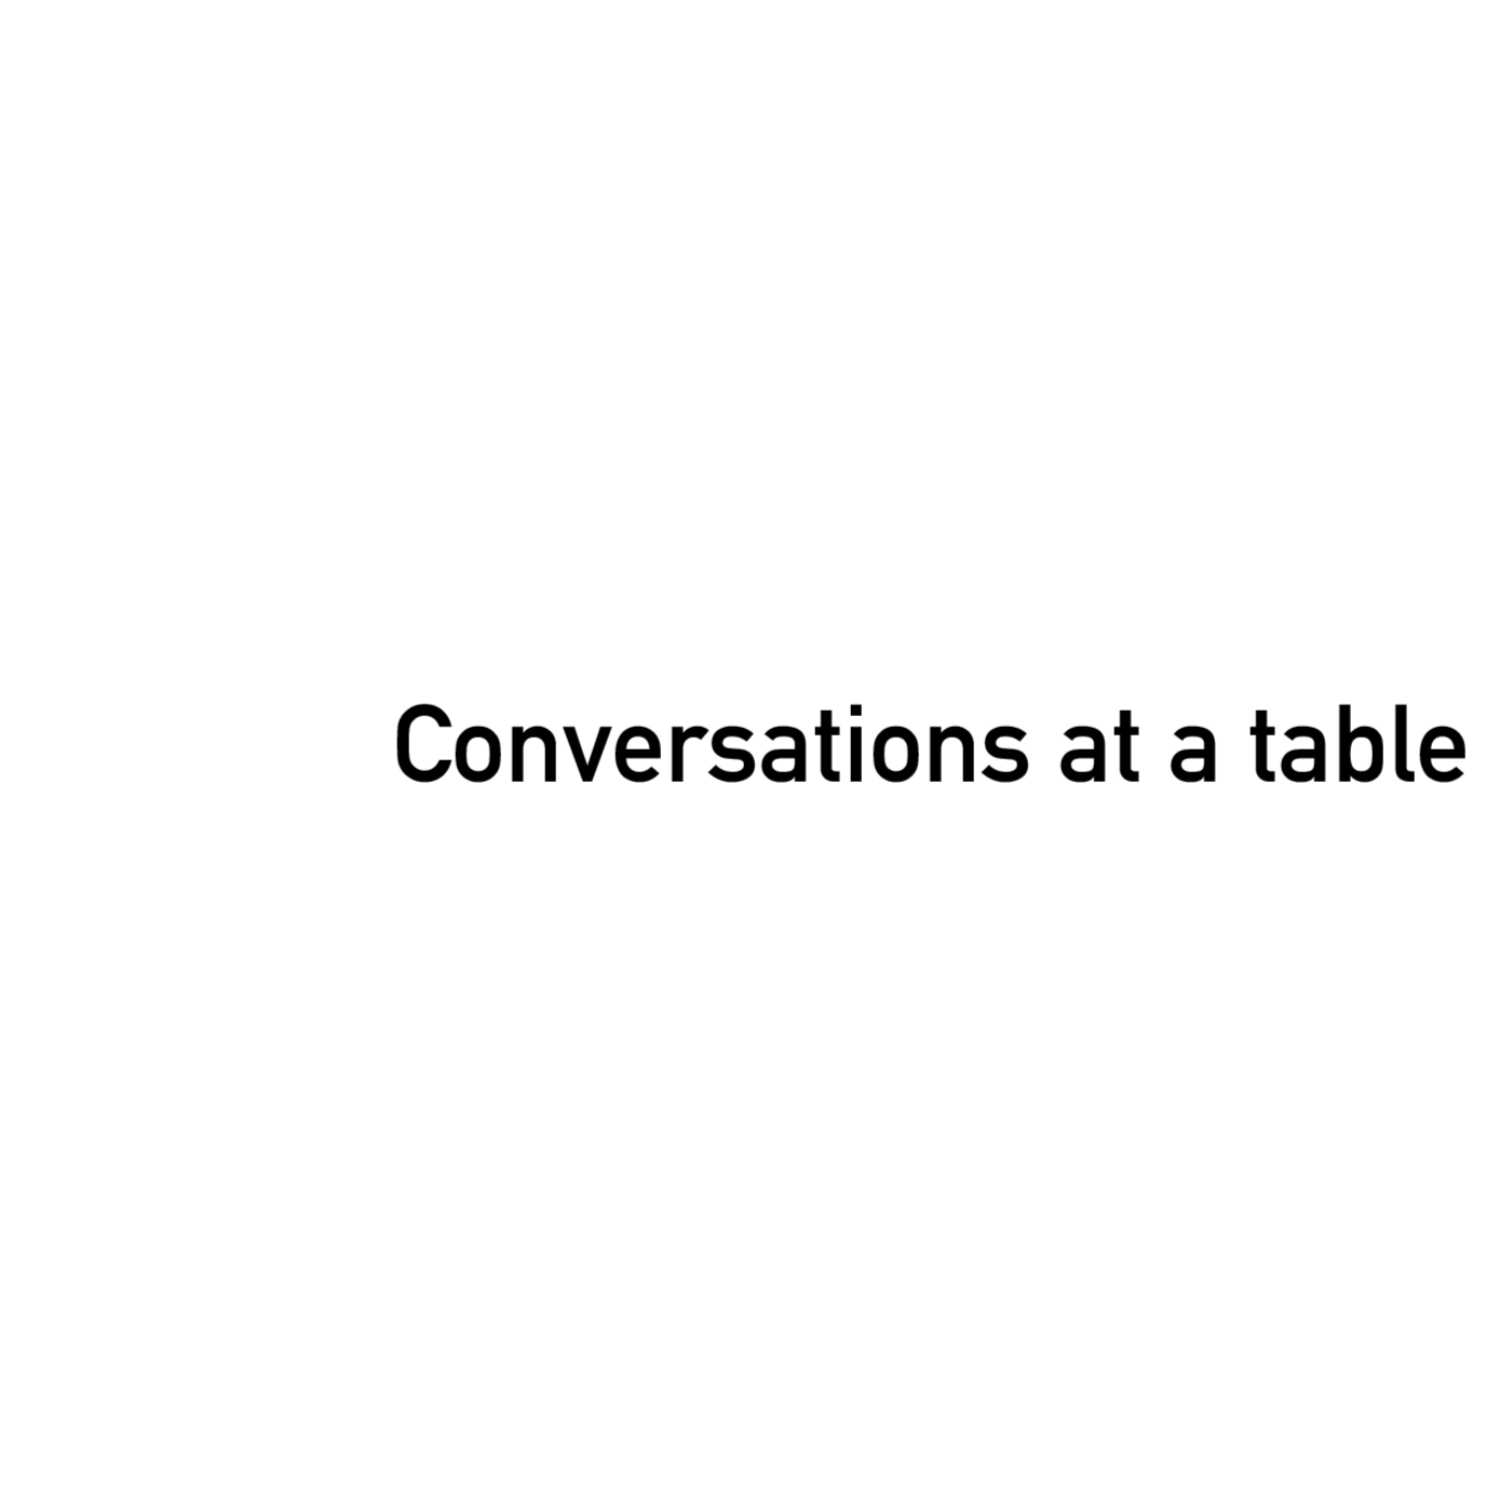 Conversations at a table